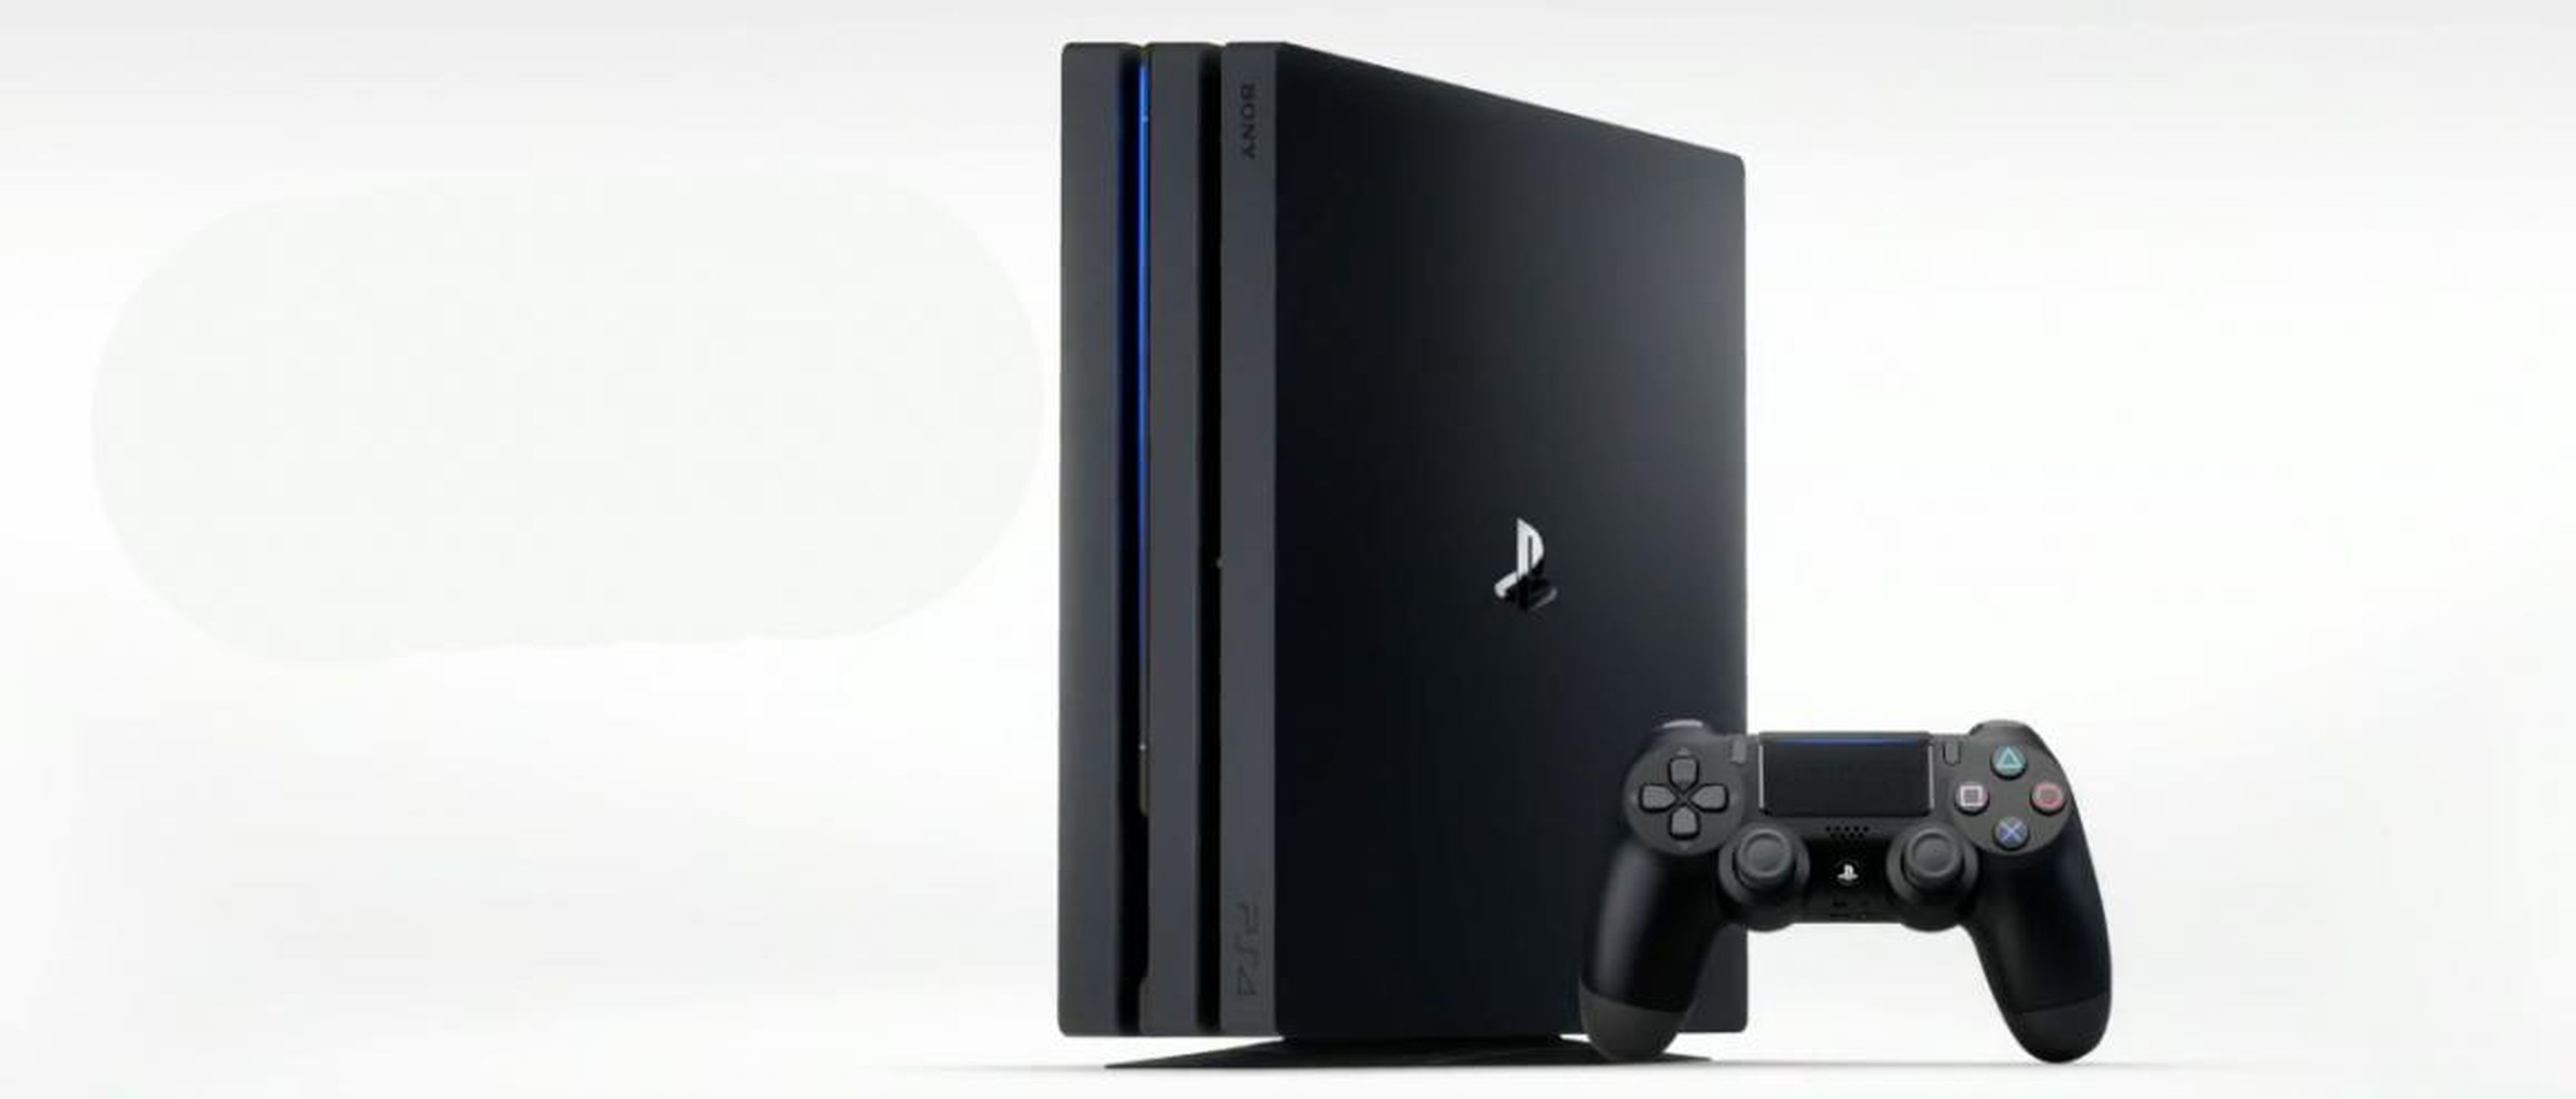 9. If you want the most powerful PlayStation 4, there's the new PlayStation 4 Pro.